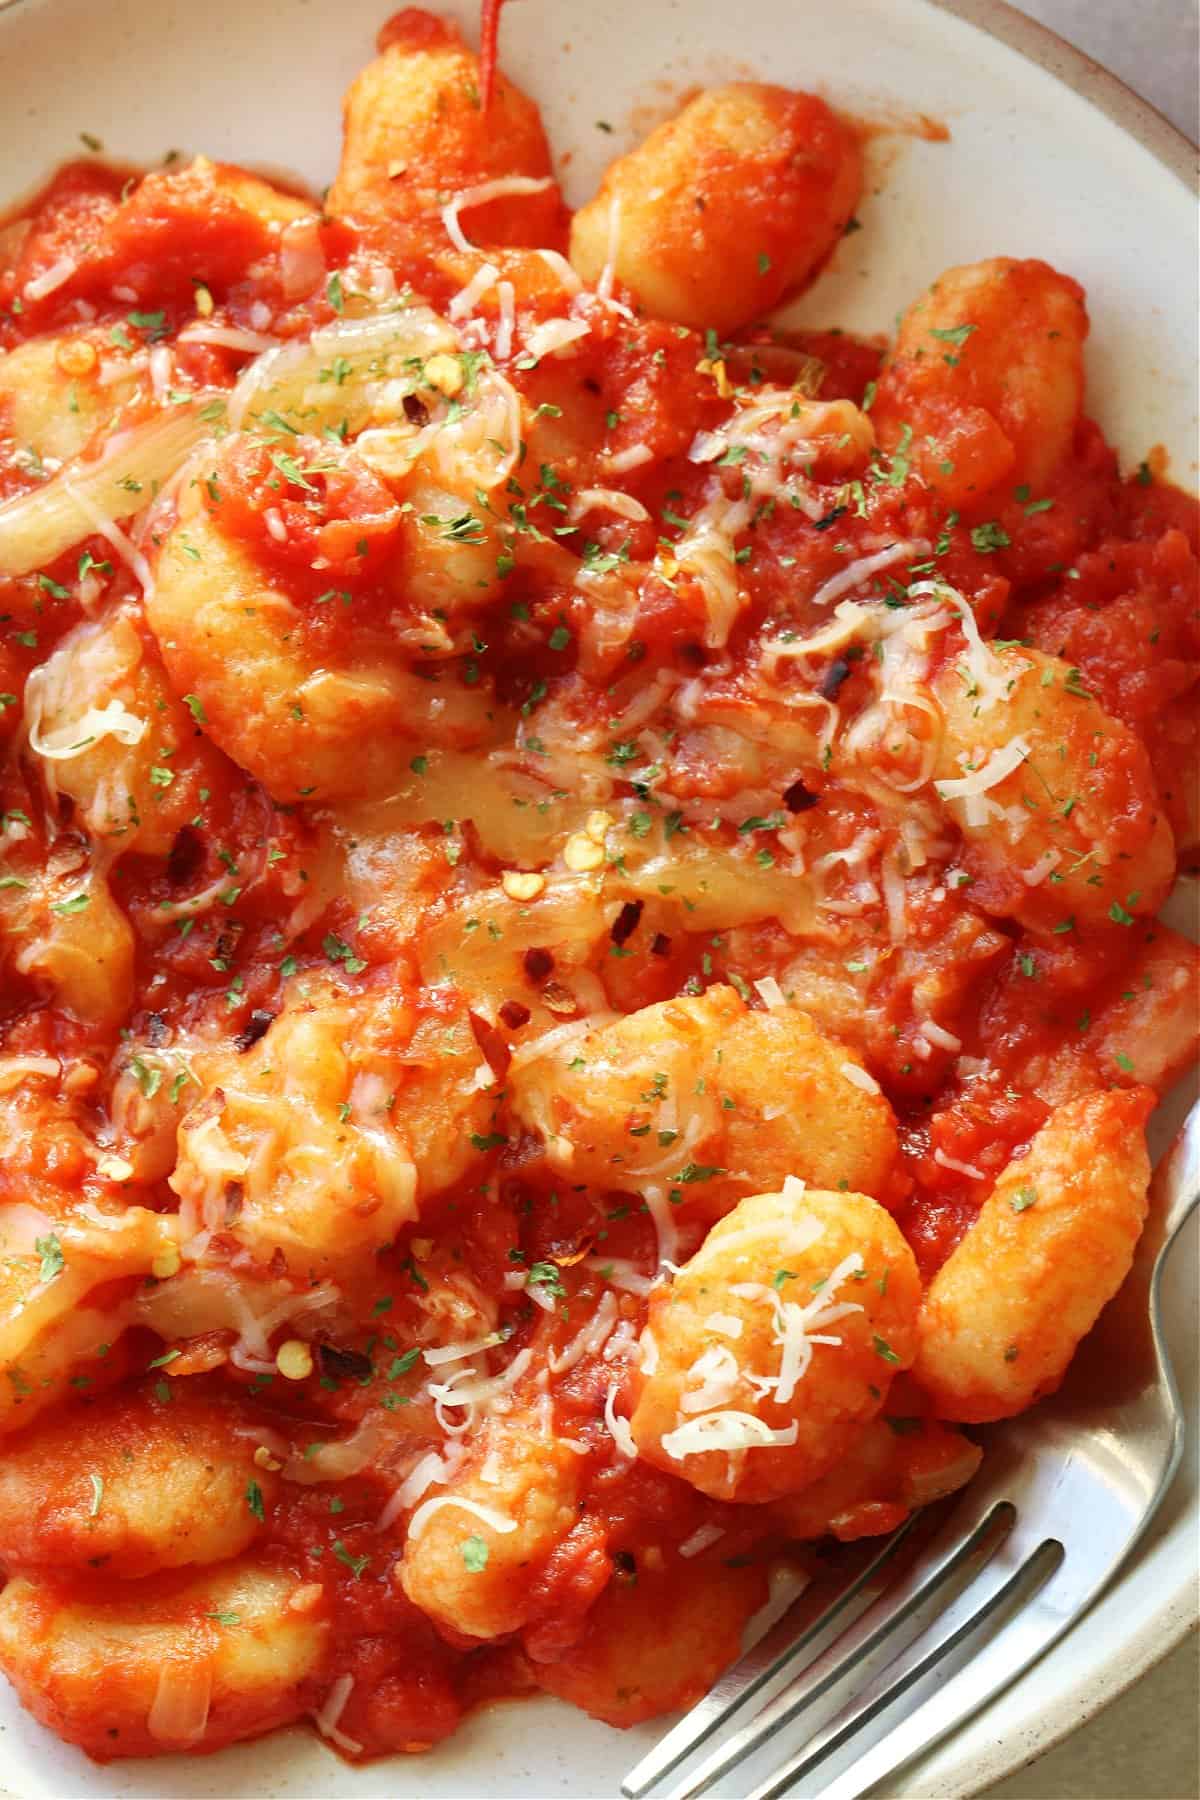 Gnocchi in tomato sauce with Parmesan on a cream plate.